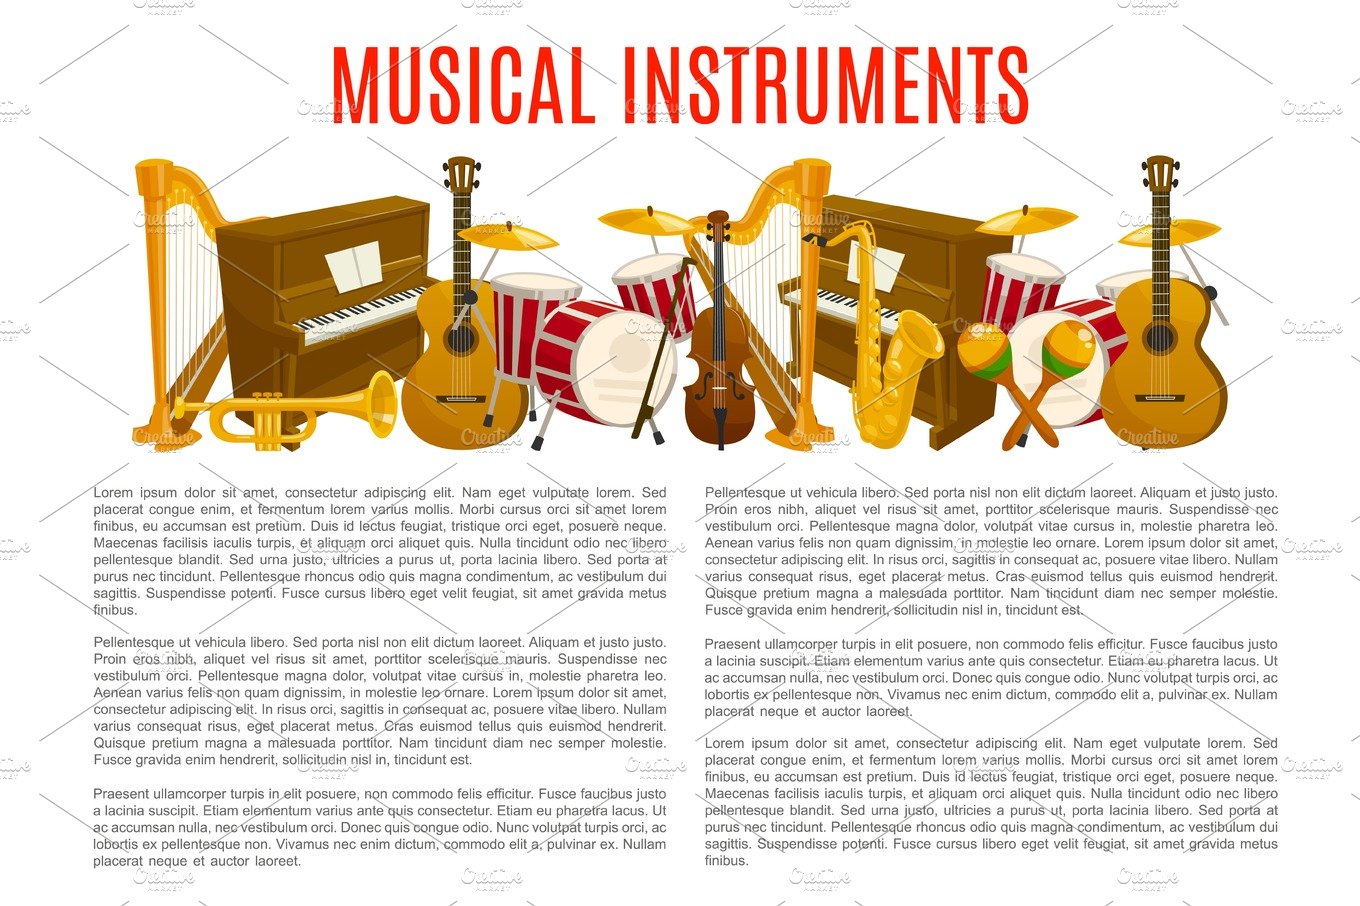 Musical instrument poster template, music design cover image.